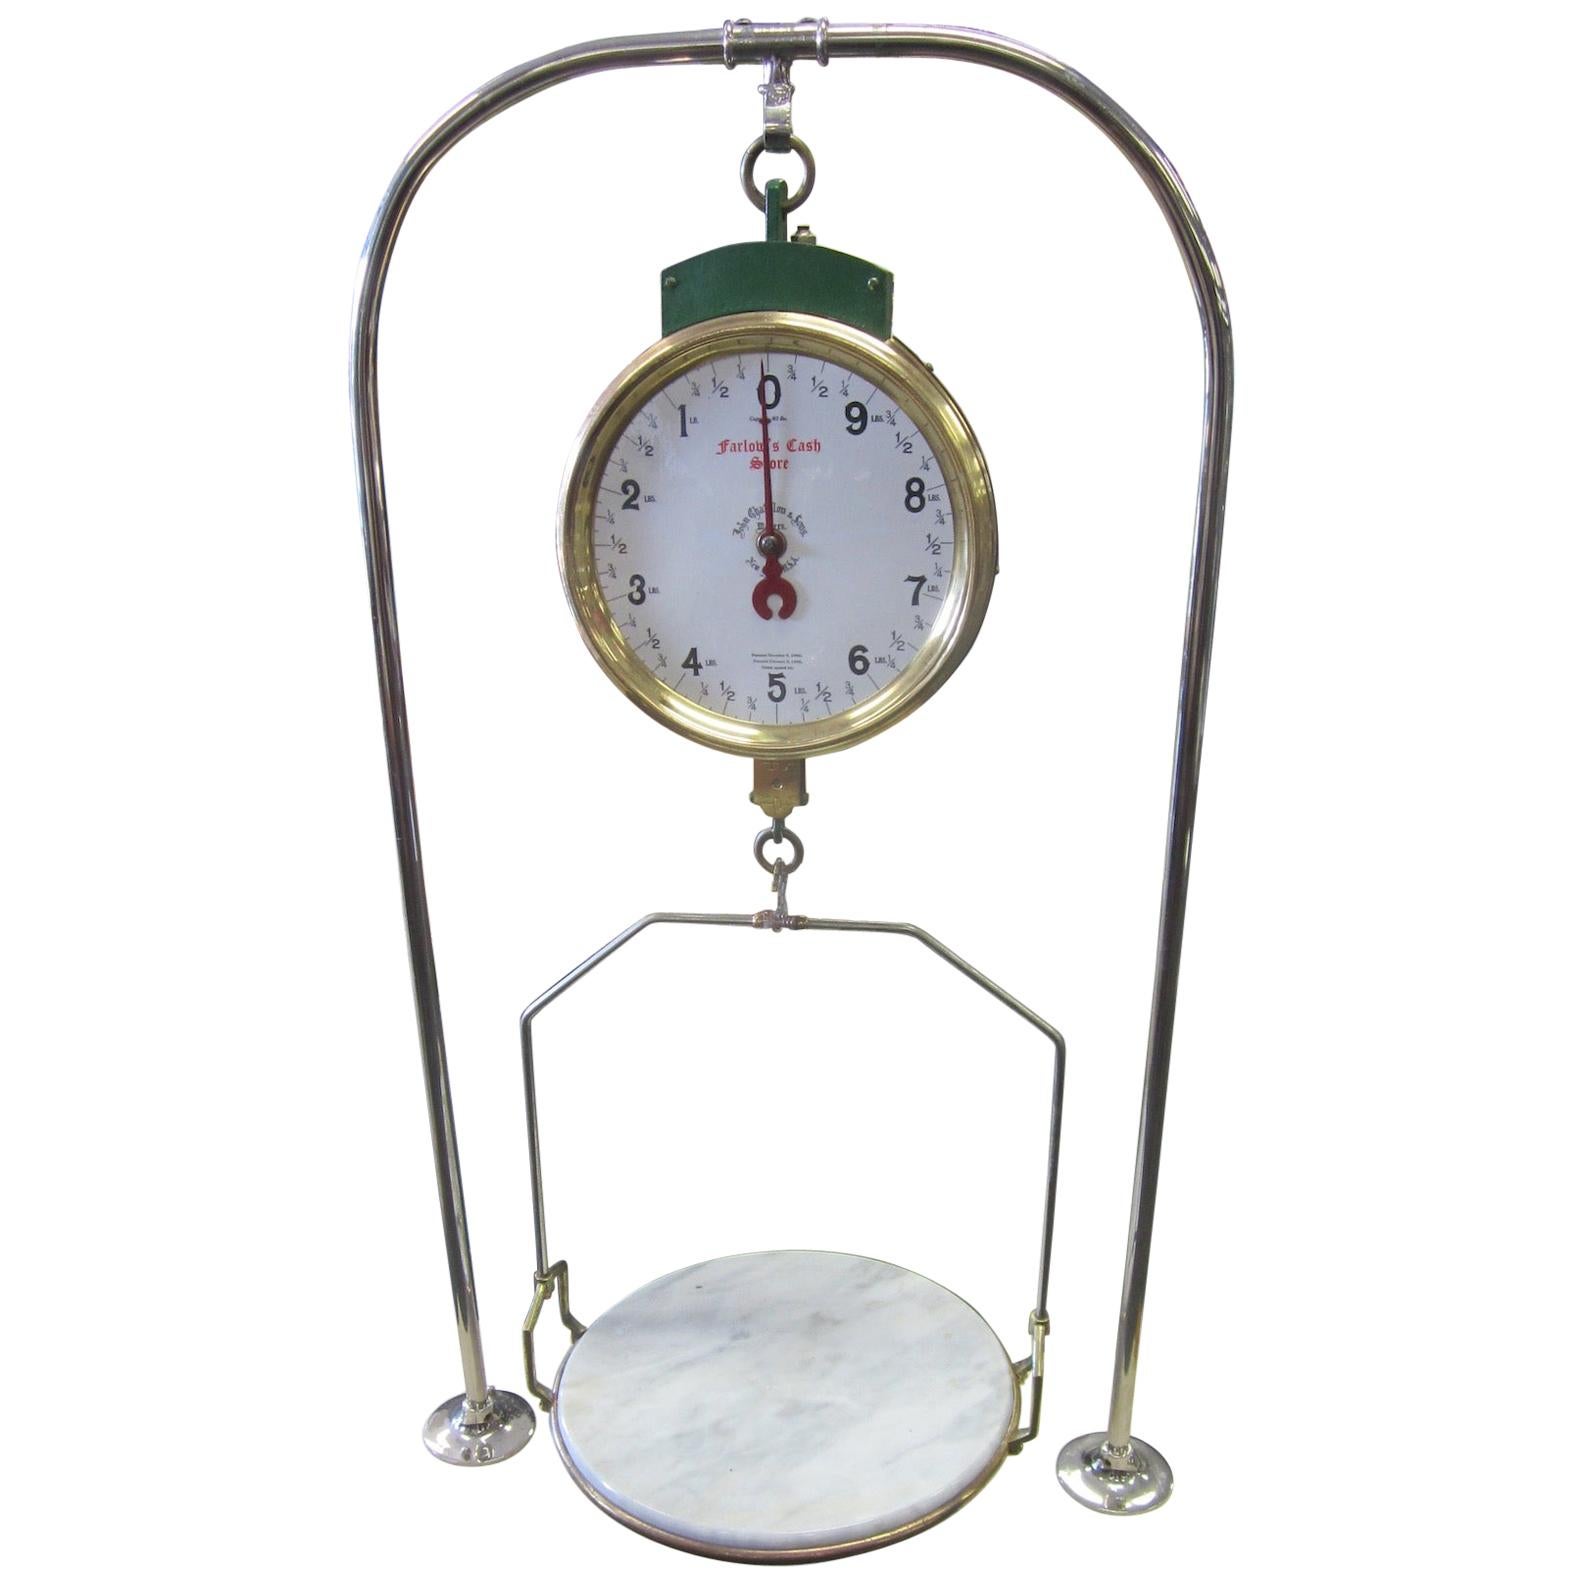 Scales made by John Chattilon & Sons, New York  For Sale